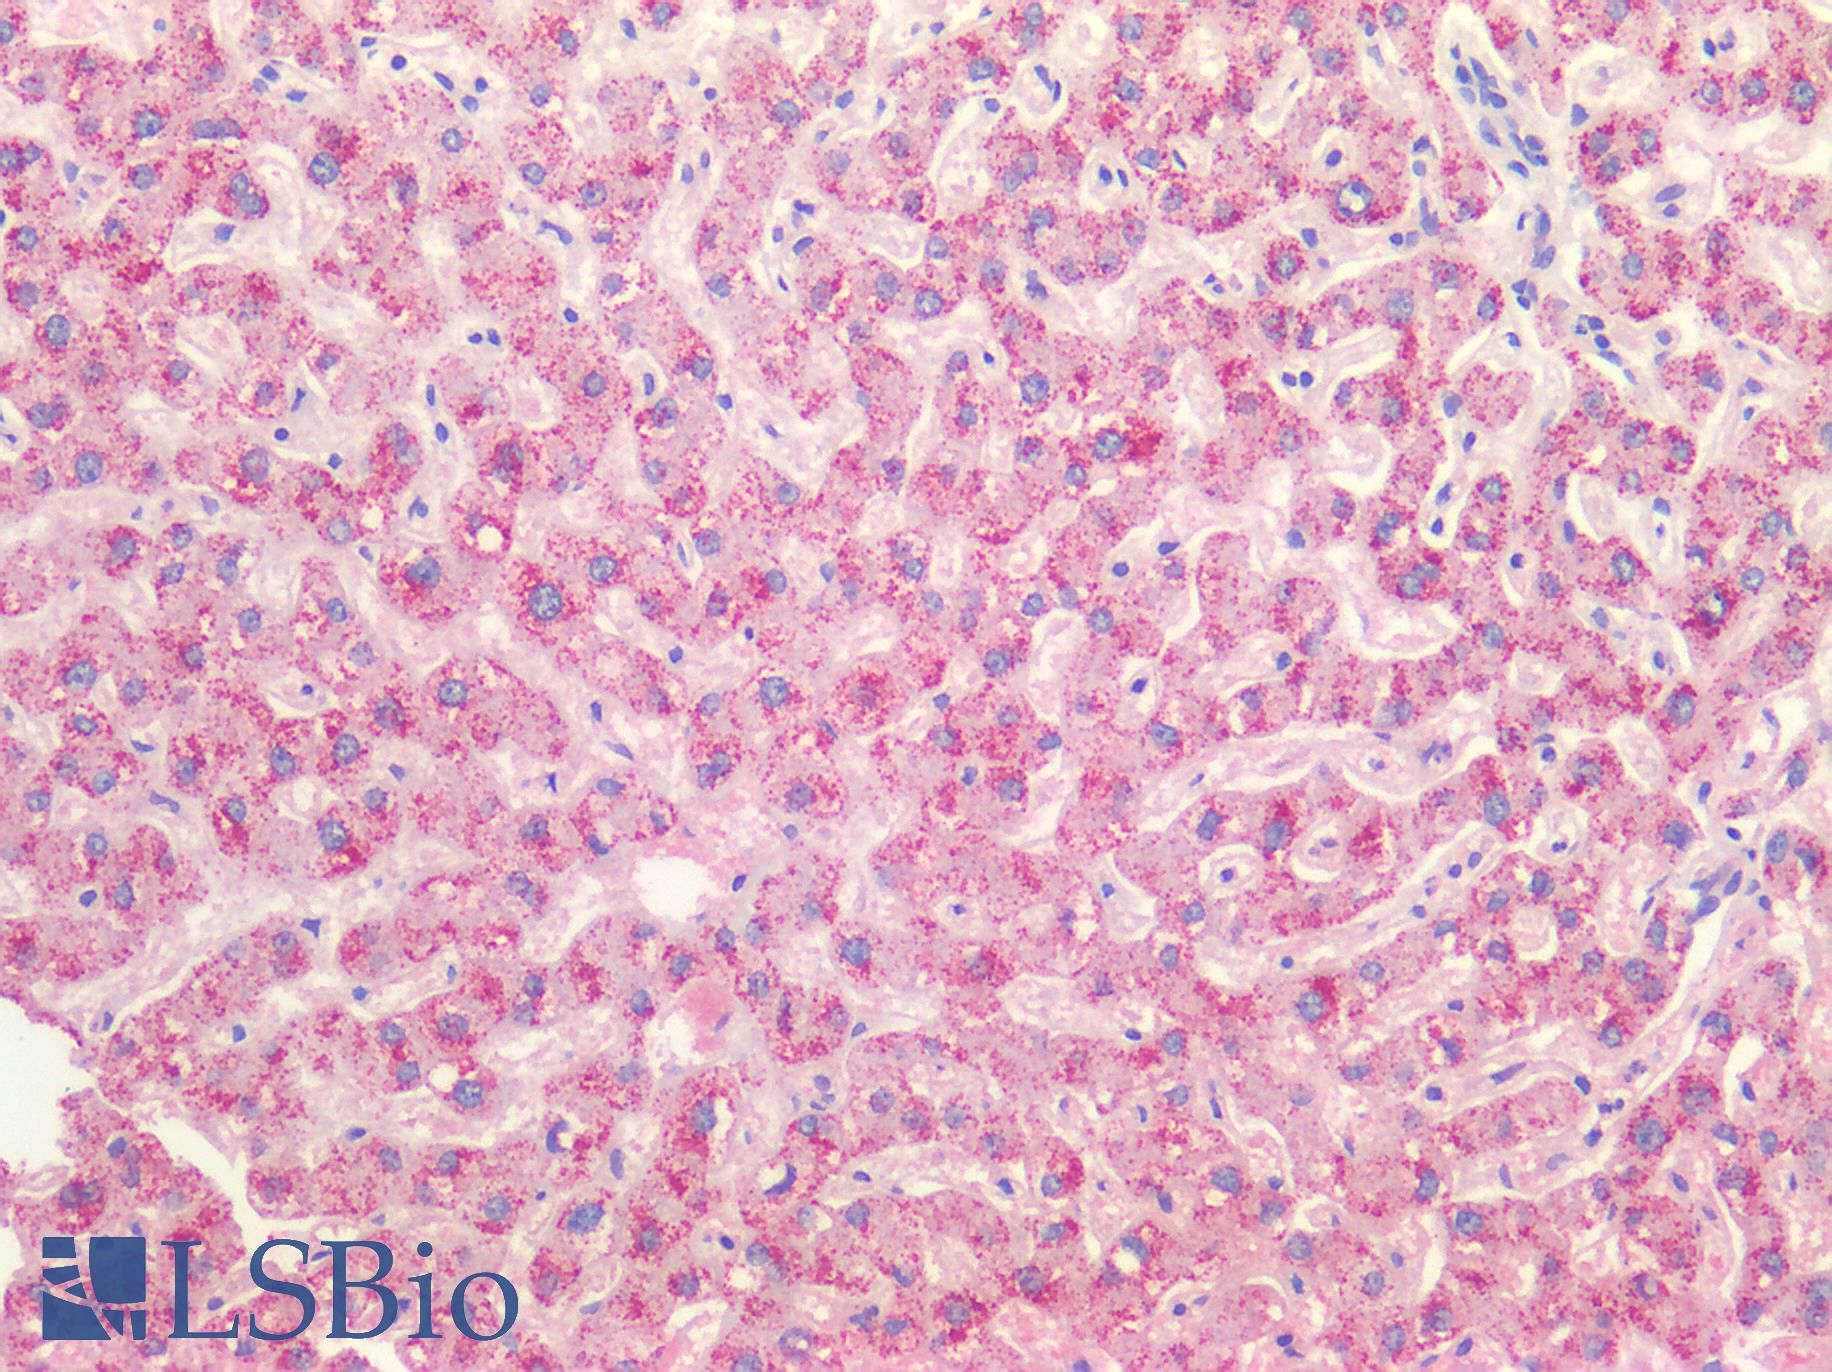 HAO1 Antibody - Human Liver: Formalin-Fixed, Paraffin-Embedded (FFPE)